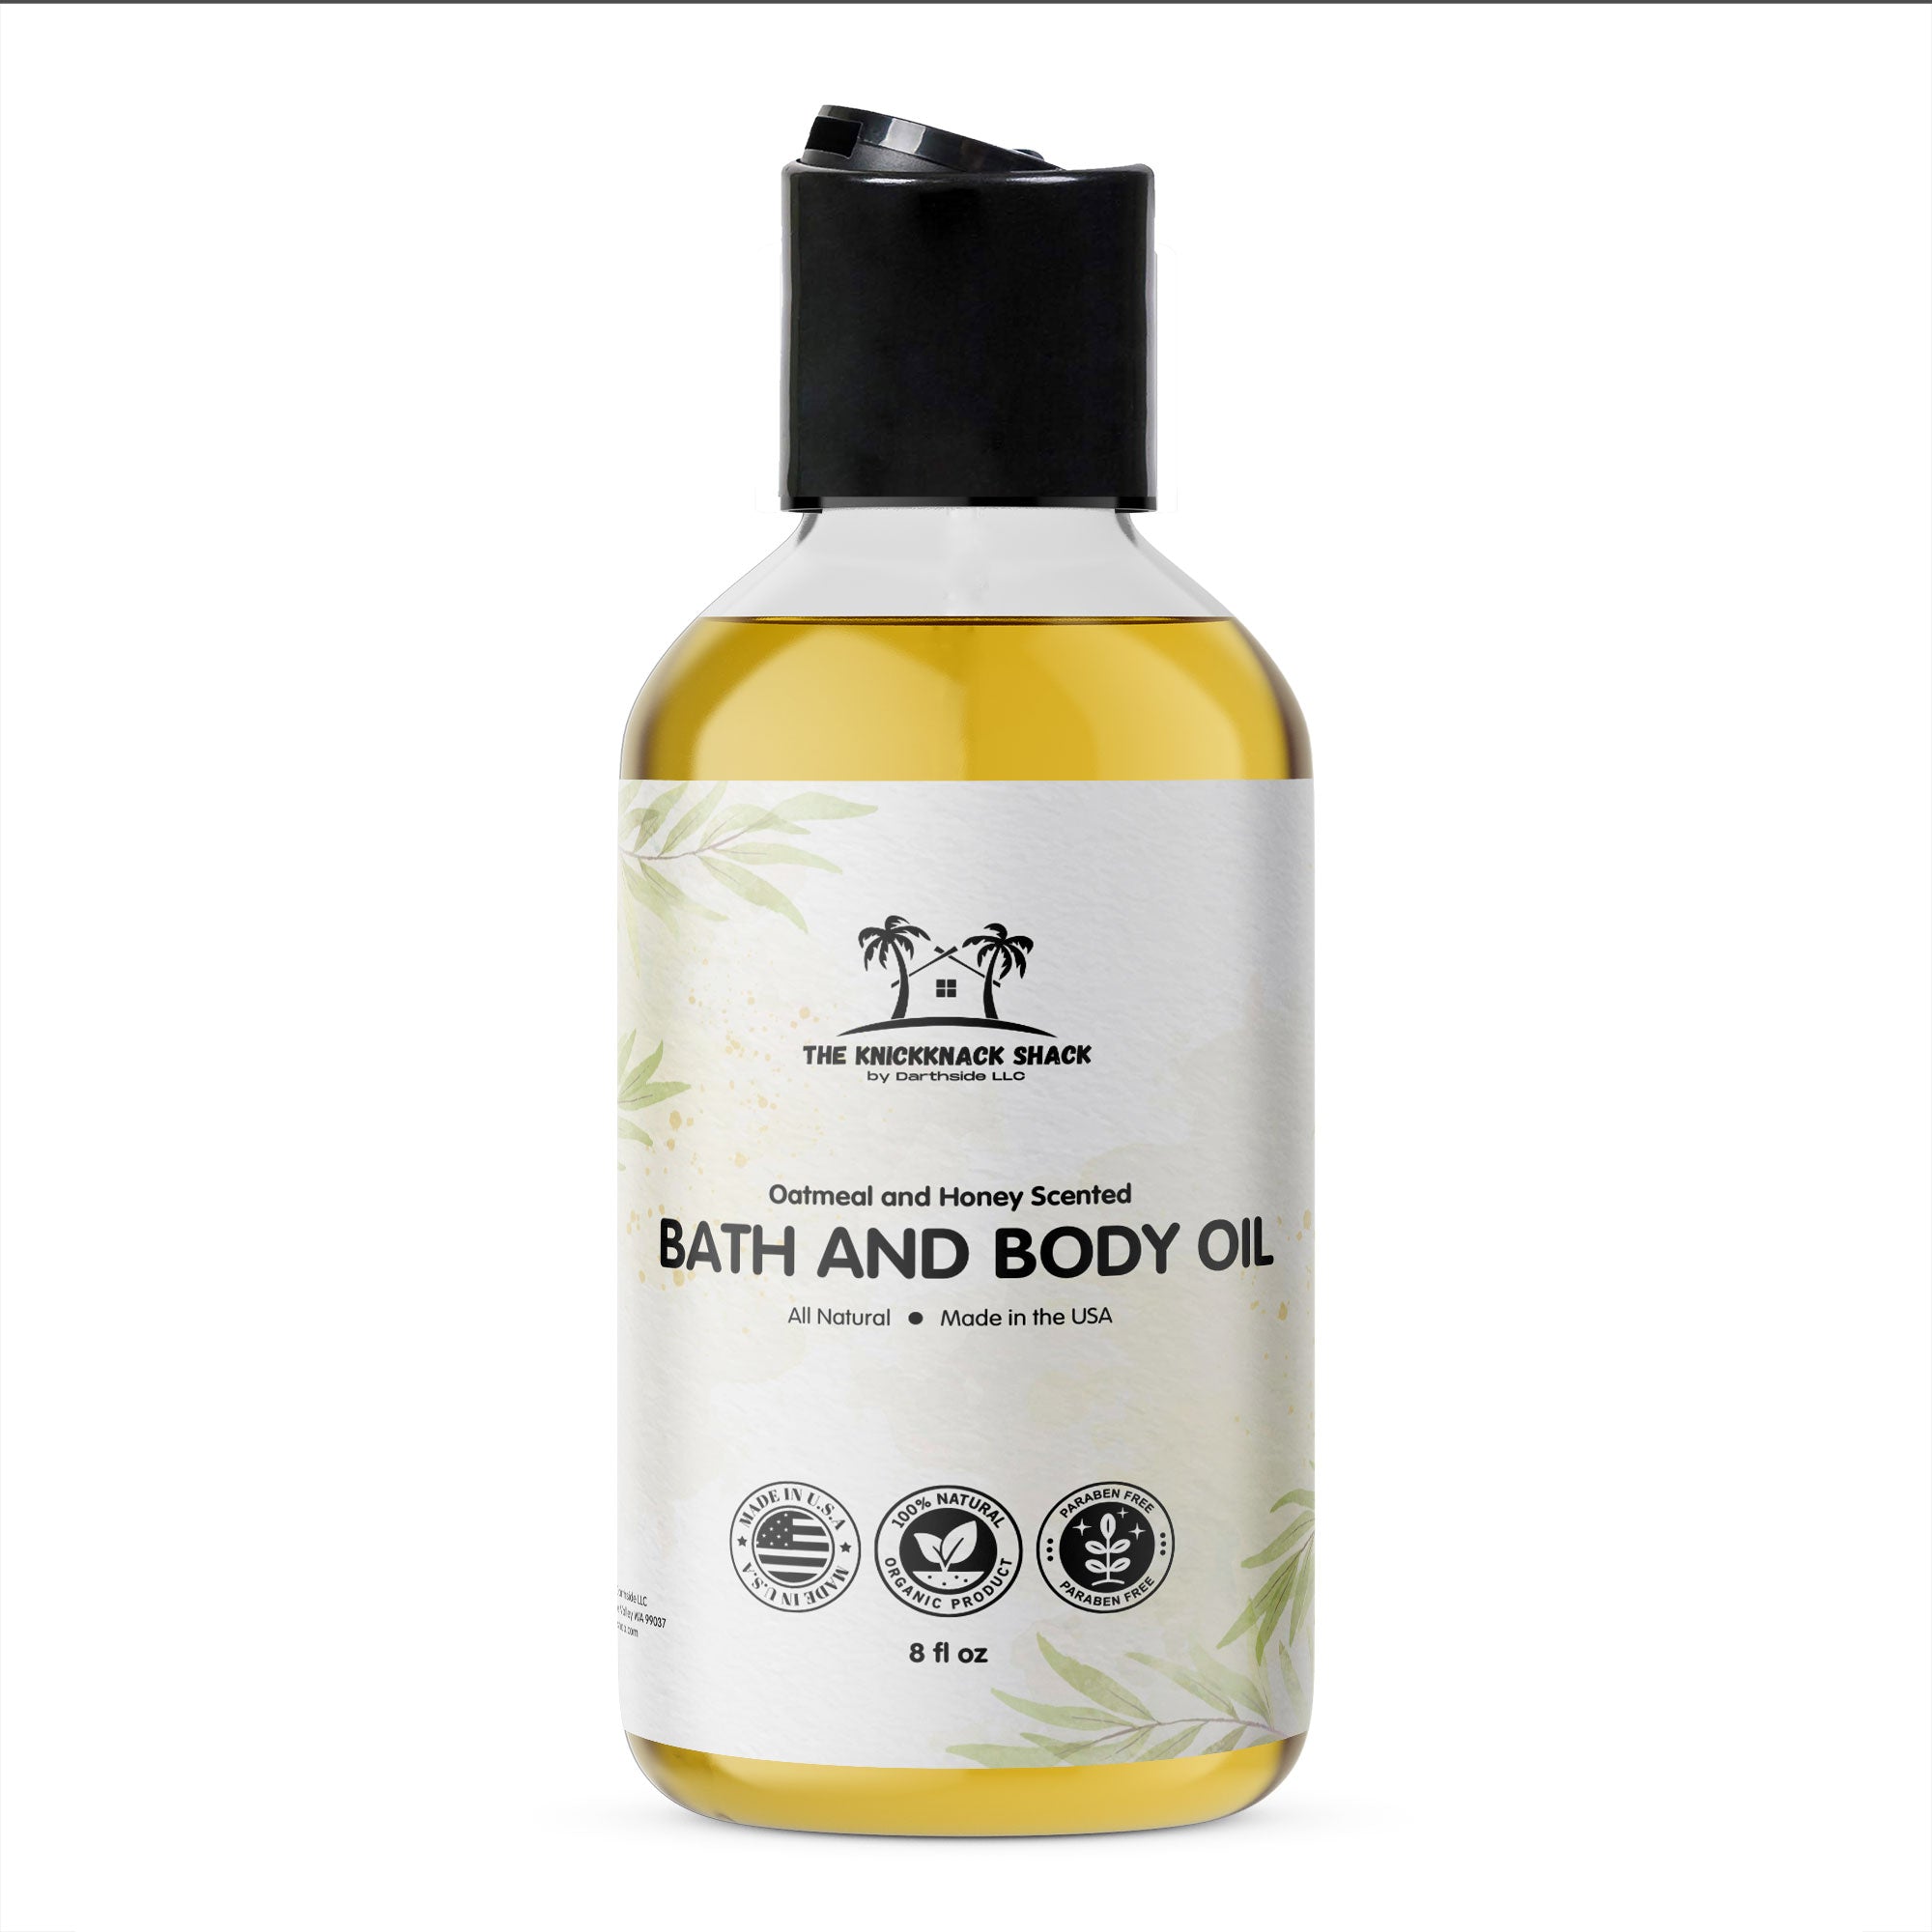 Oatmeal and Honey Scented Bath and Body Oil